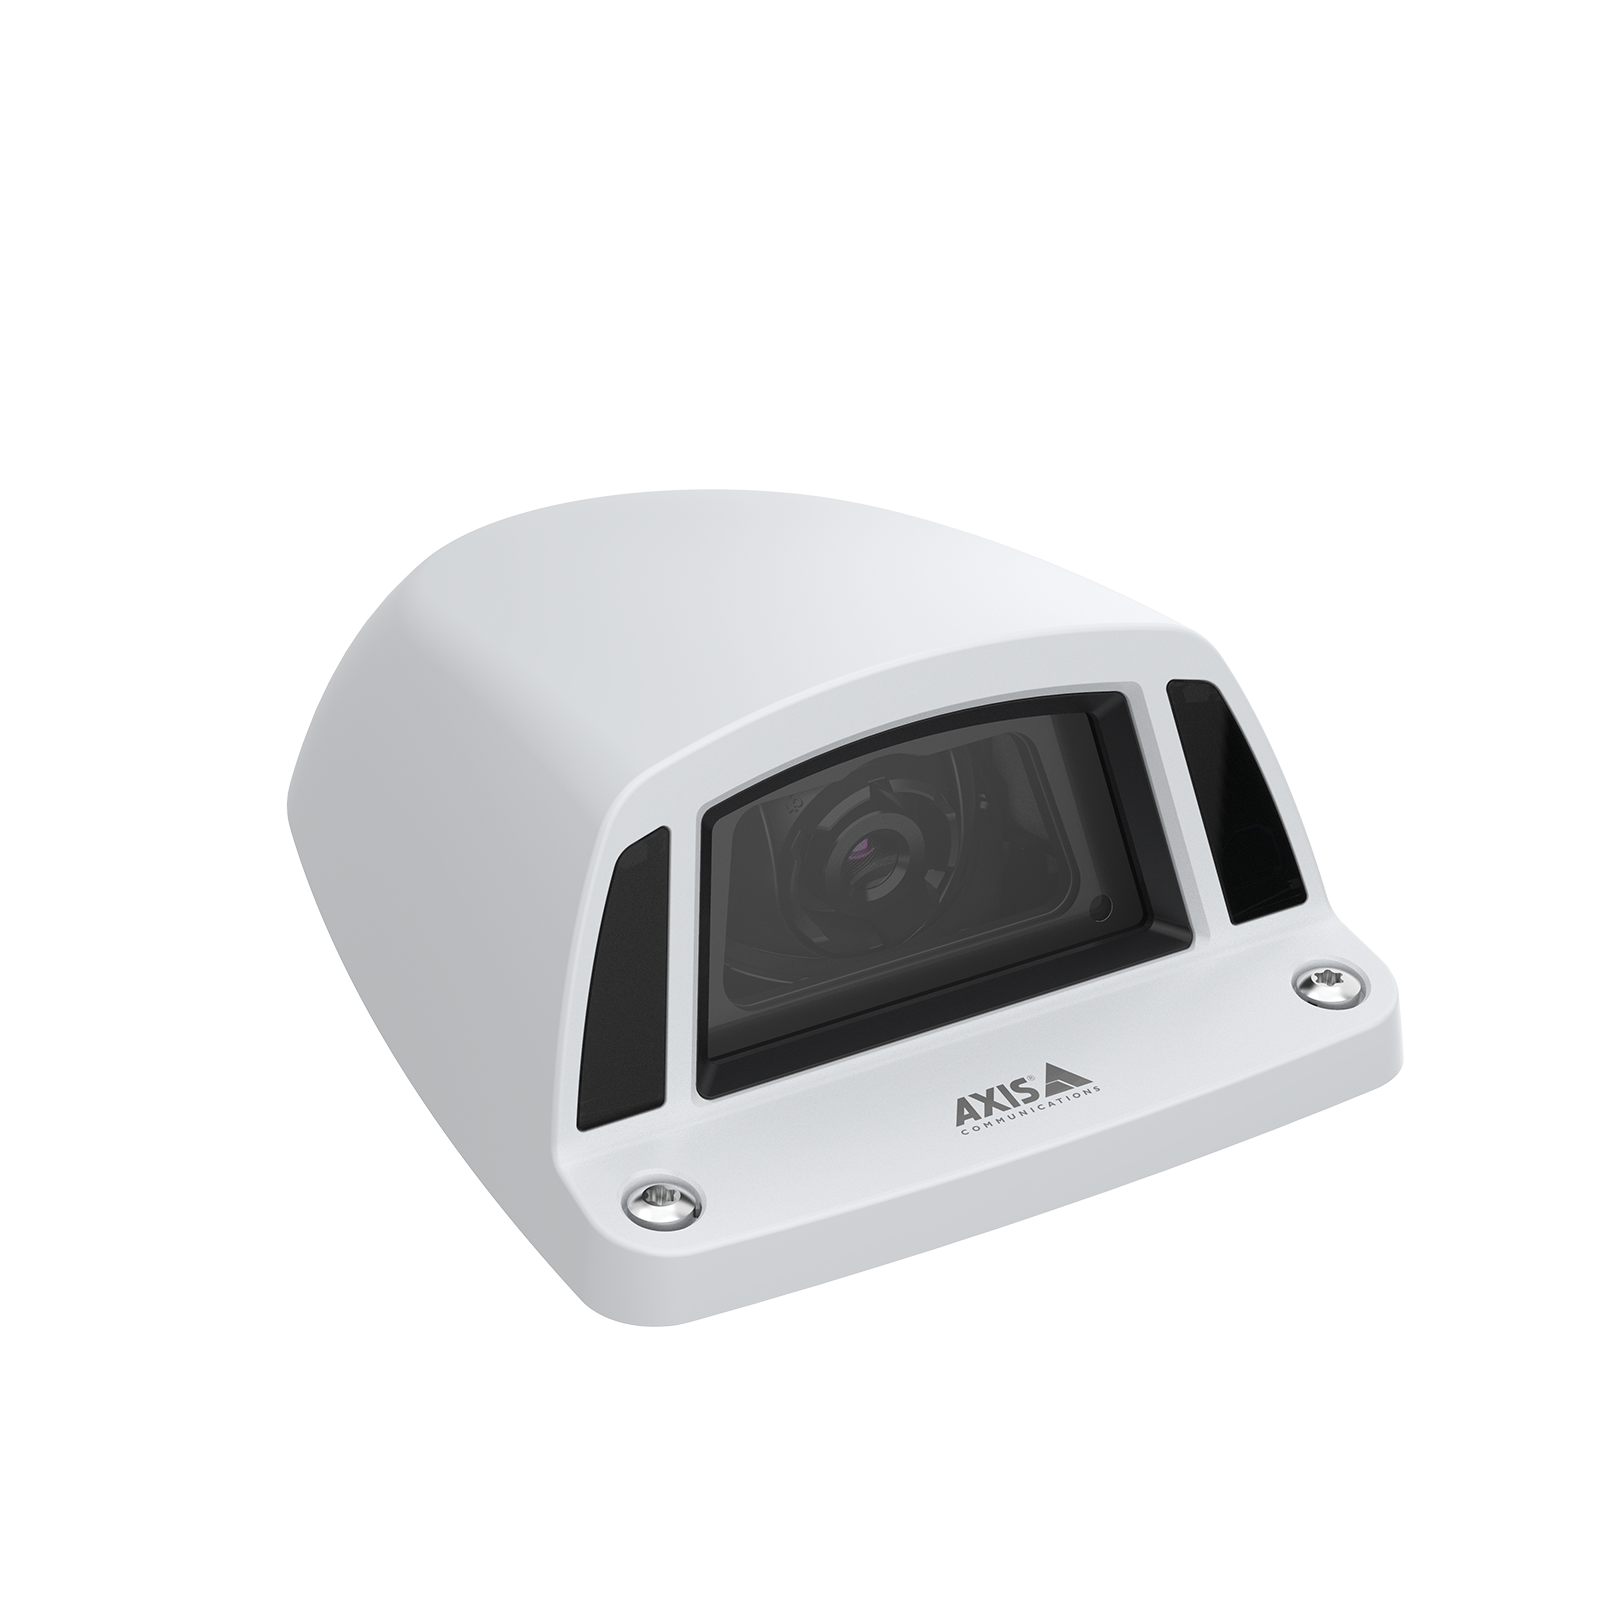 AXIS P3925-LRE Network Camera | Axis Communications